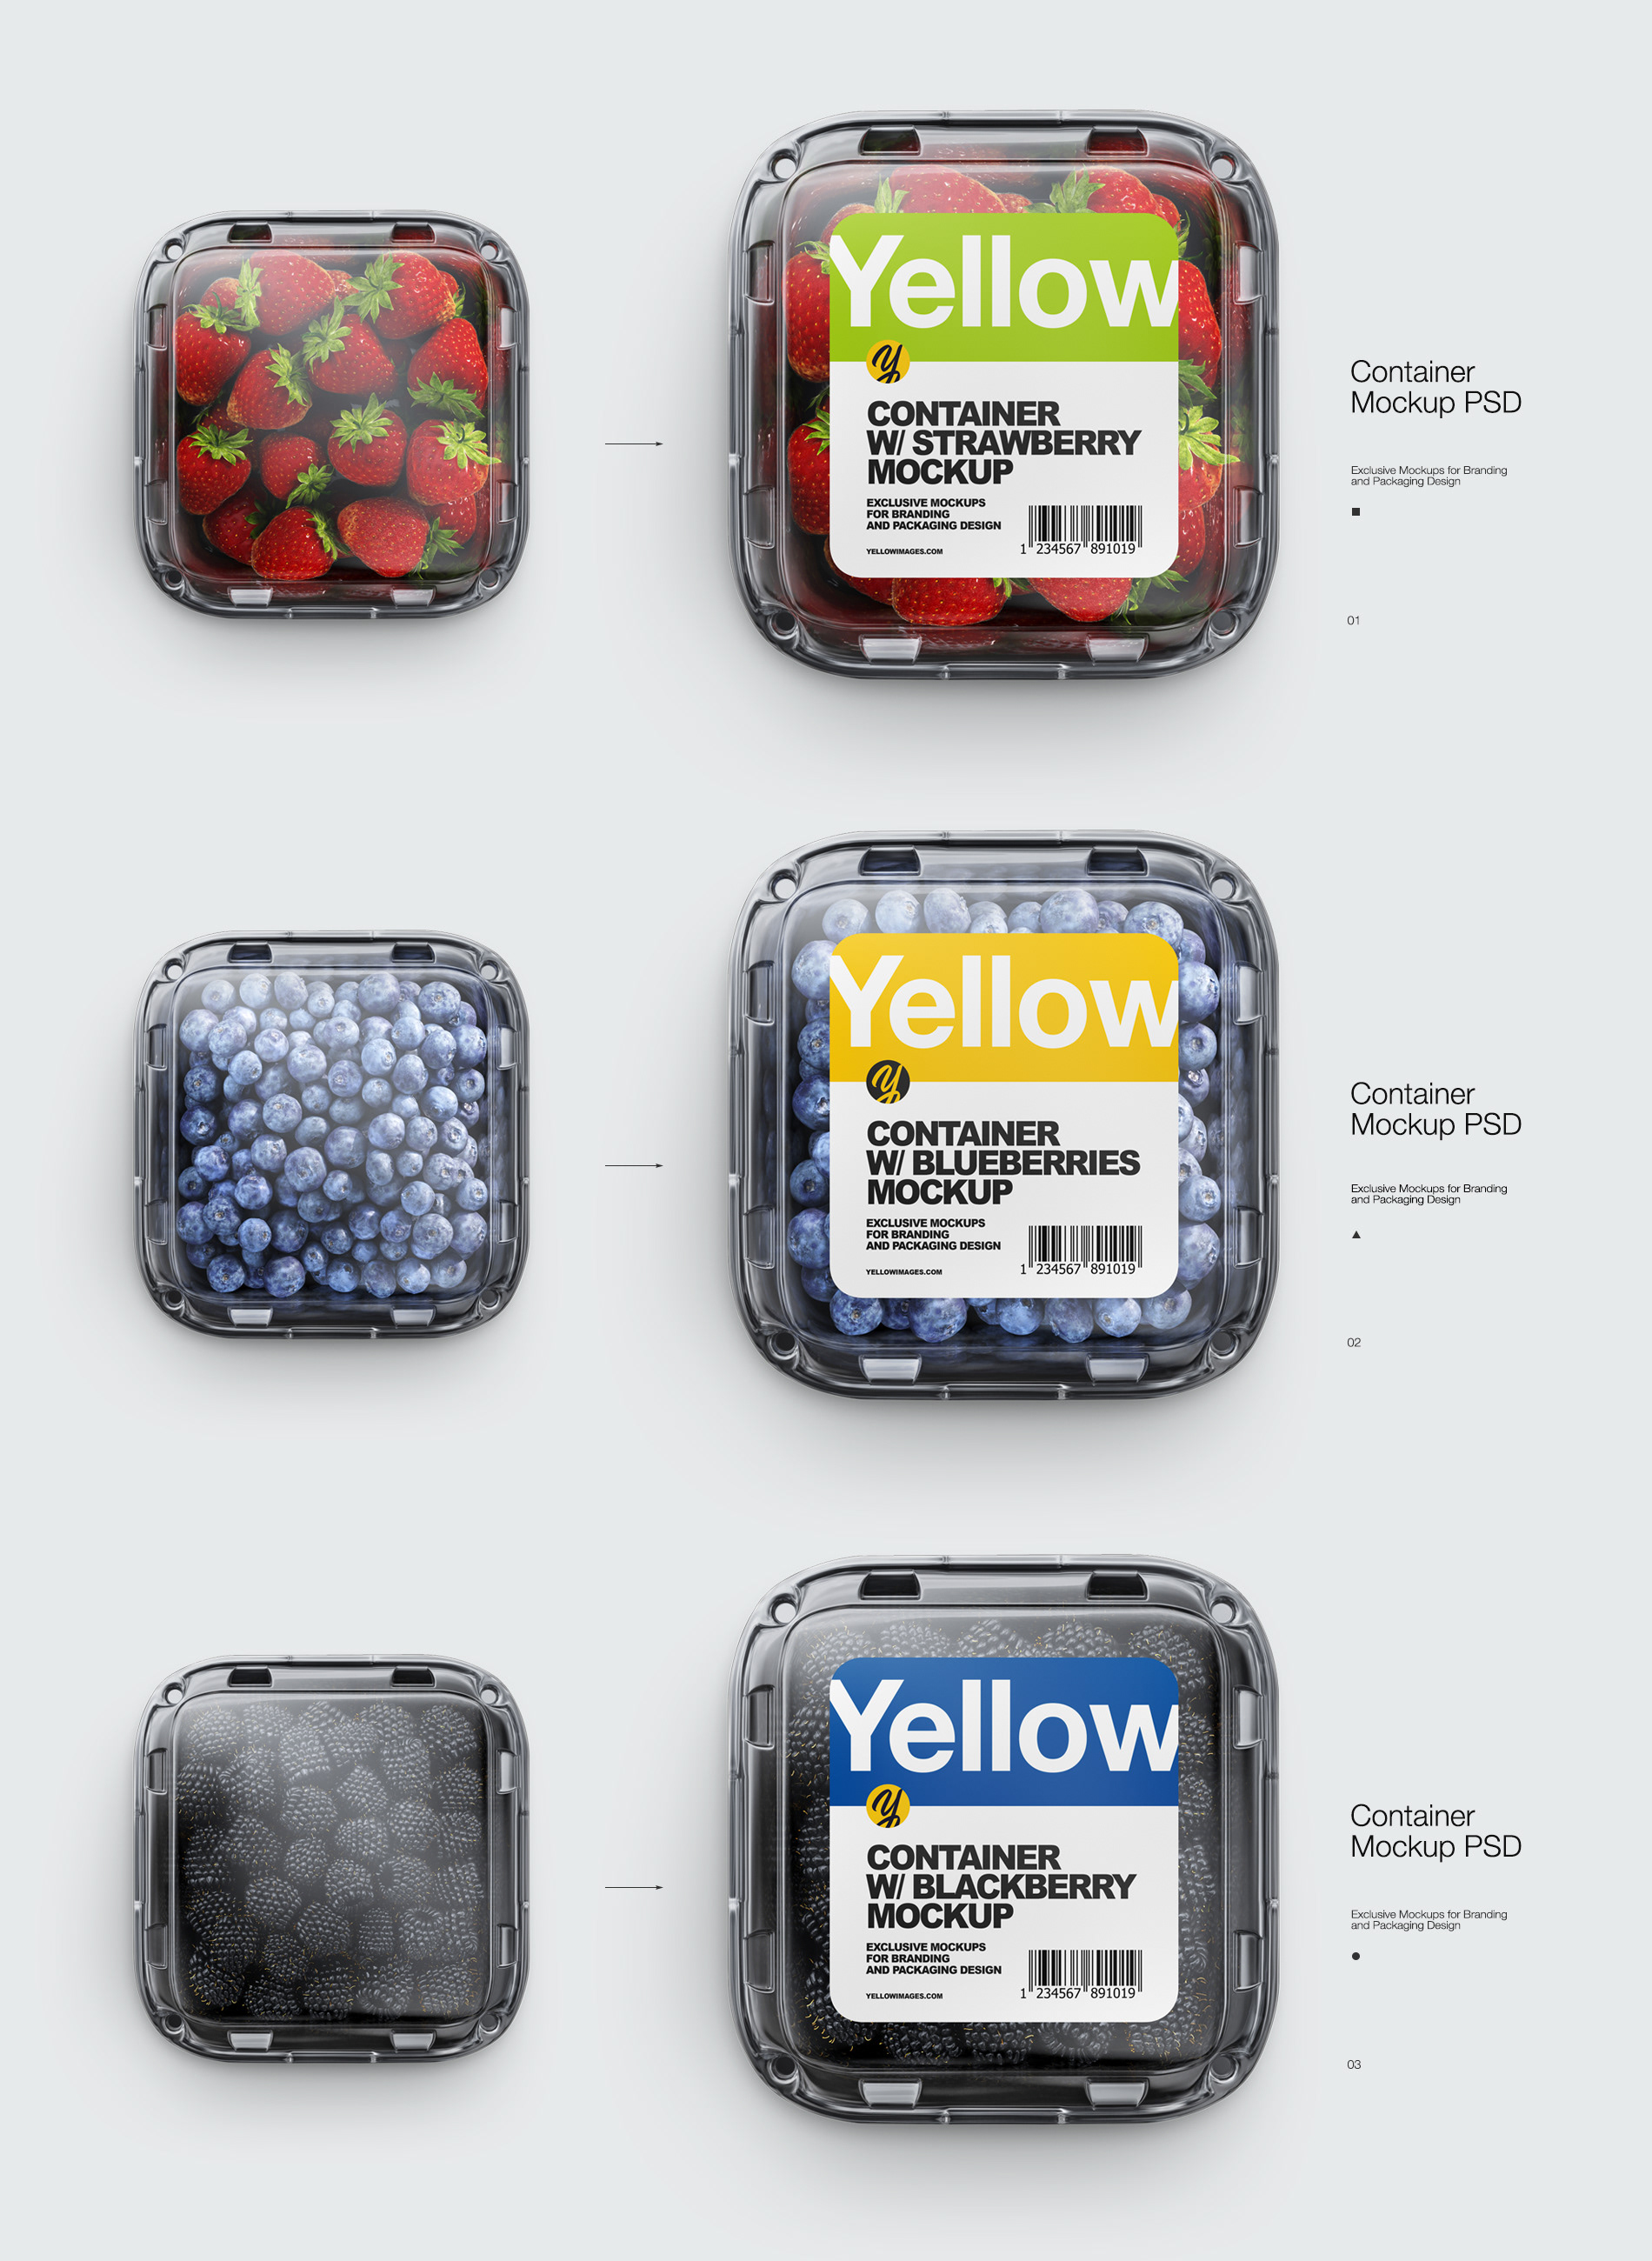 Download Containers Mockups Psd On Behance Yellowimages Mockups